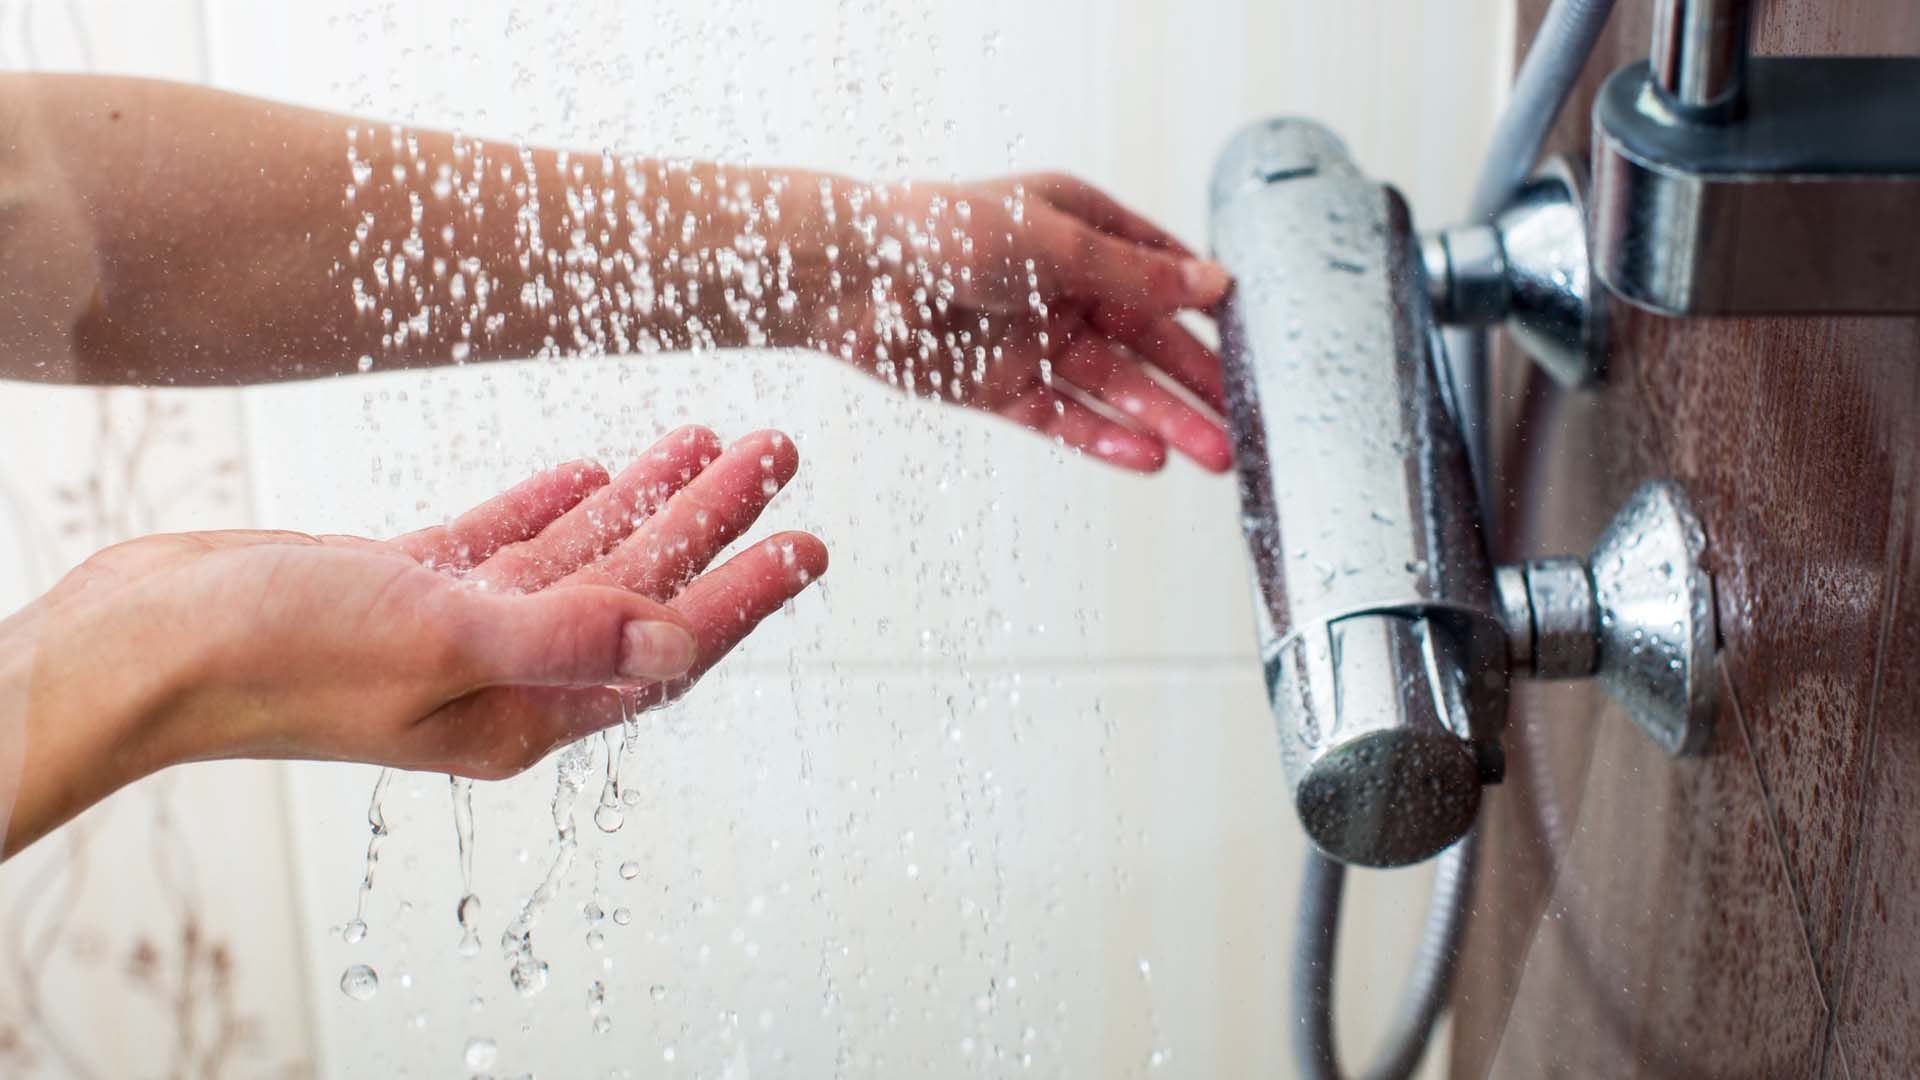 Saving electricity in the bathroom: These tips will help!